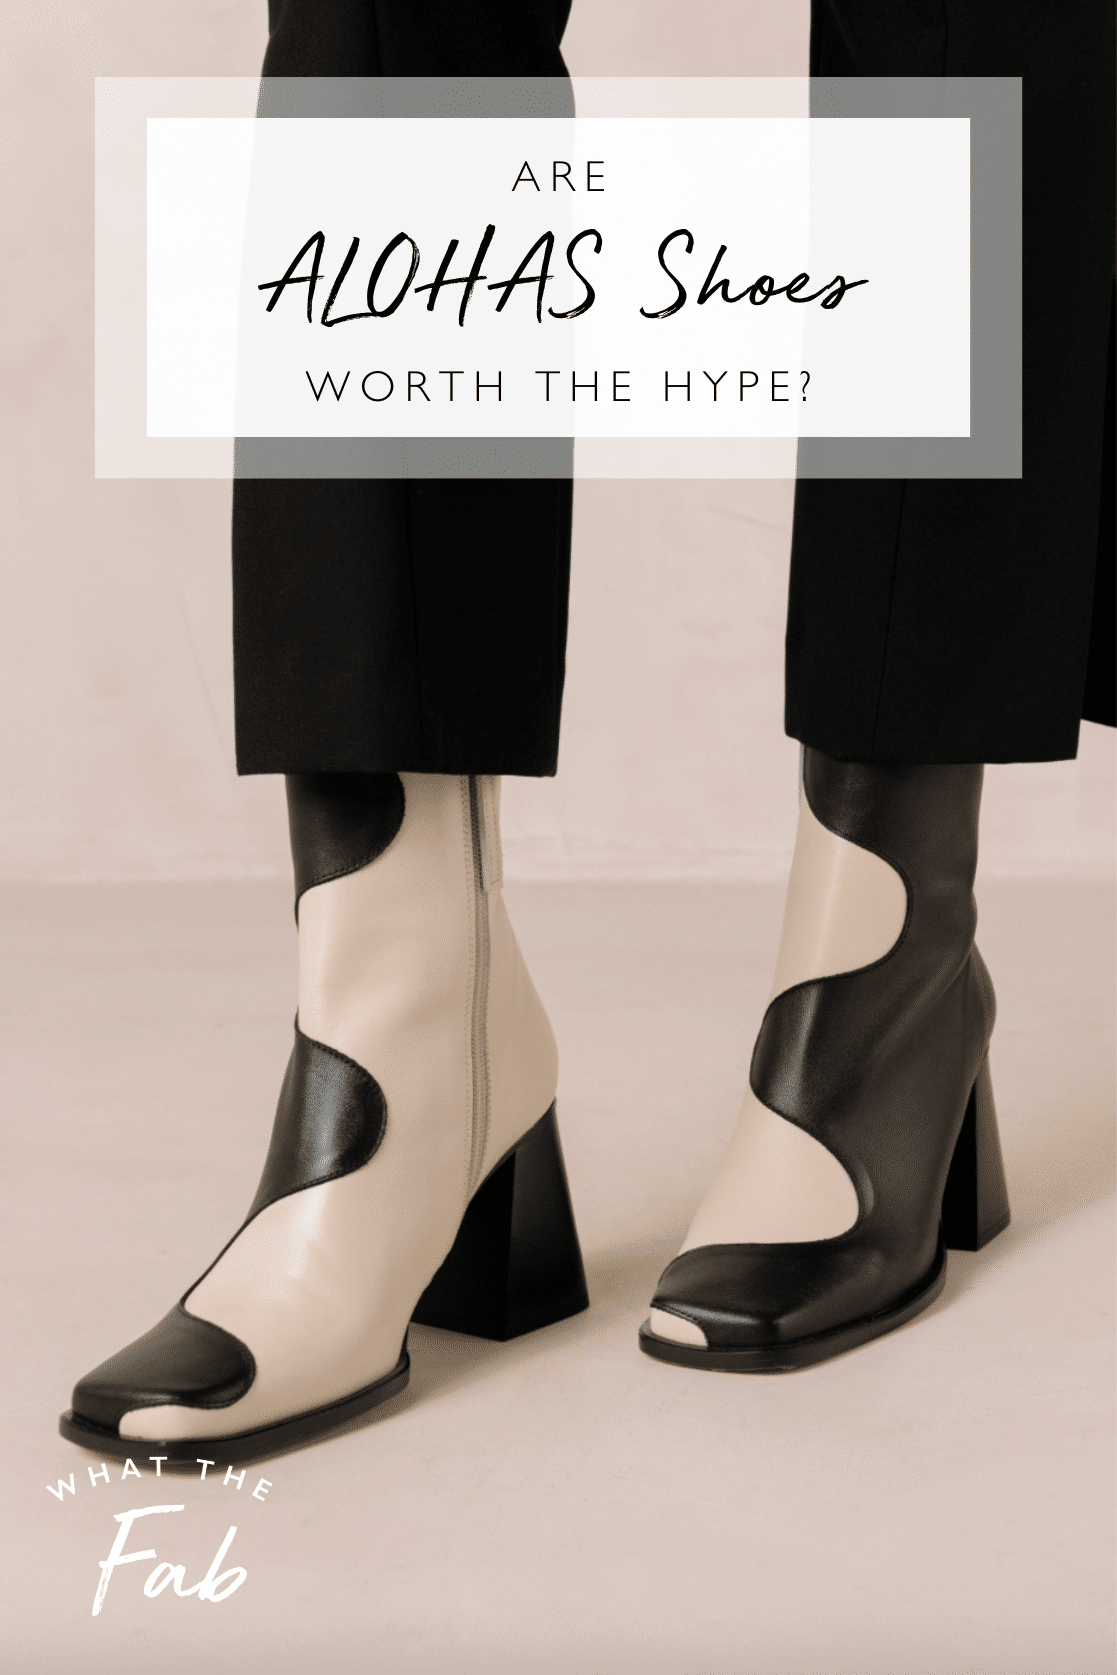 My thoughts on ALOHAS shoes, by fashion blogger What The Fab